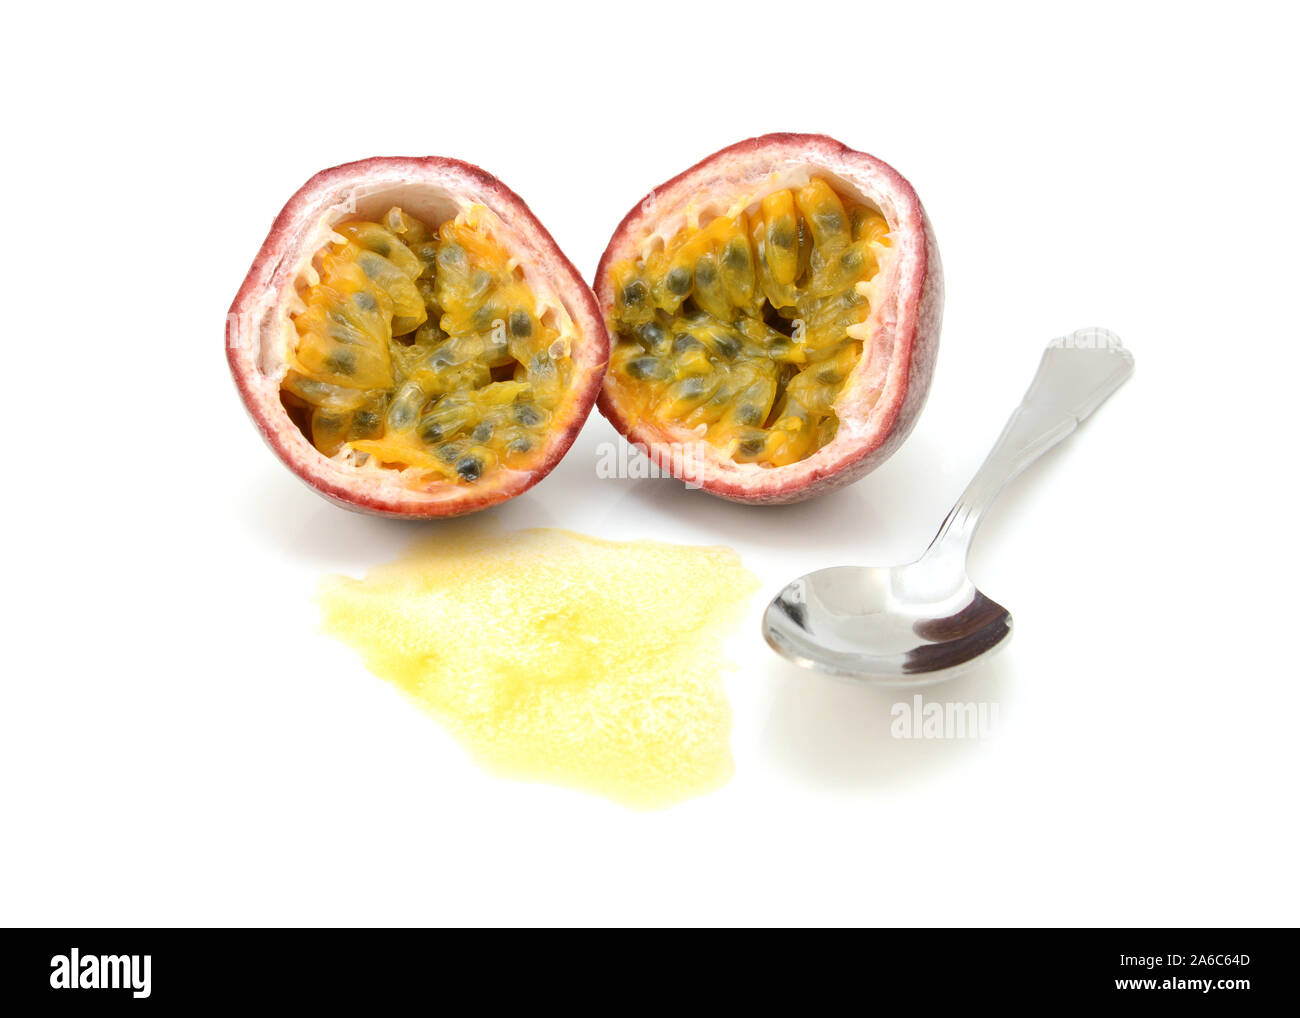 Passion fruit cut in half with juicy pulp and seeds, ready to eat with a spoon, on a white background Stock Photo